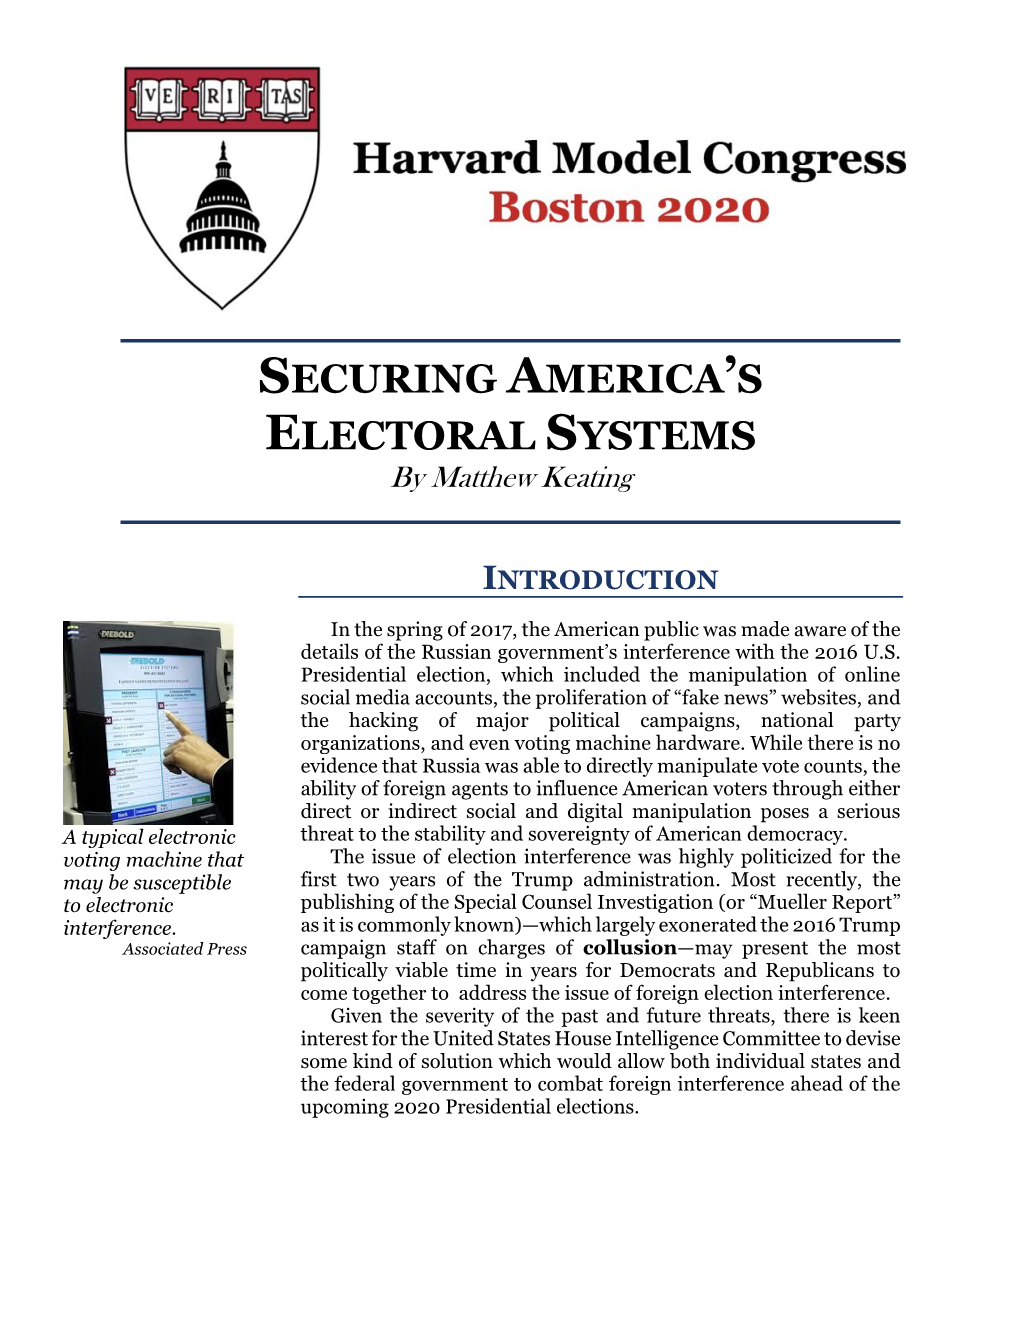 Securing America's Electoral Systems